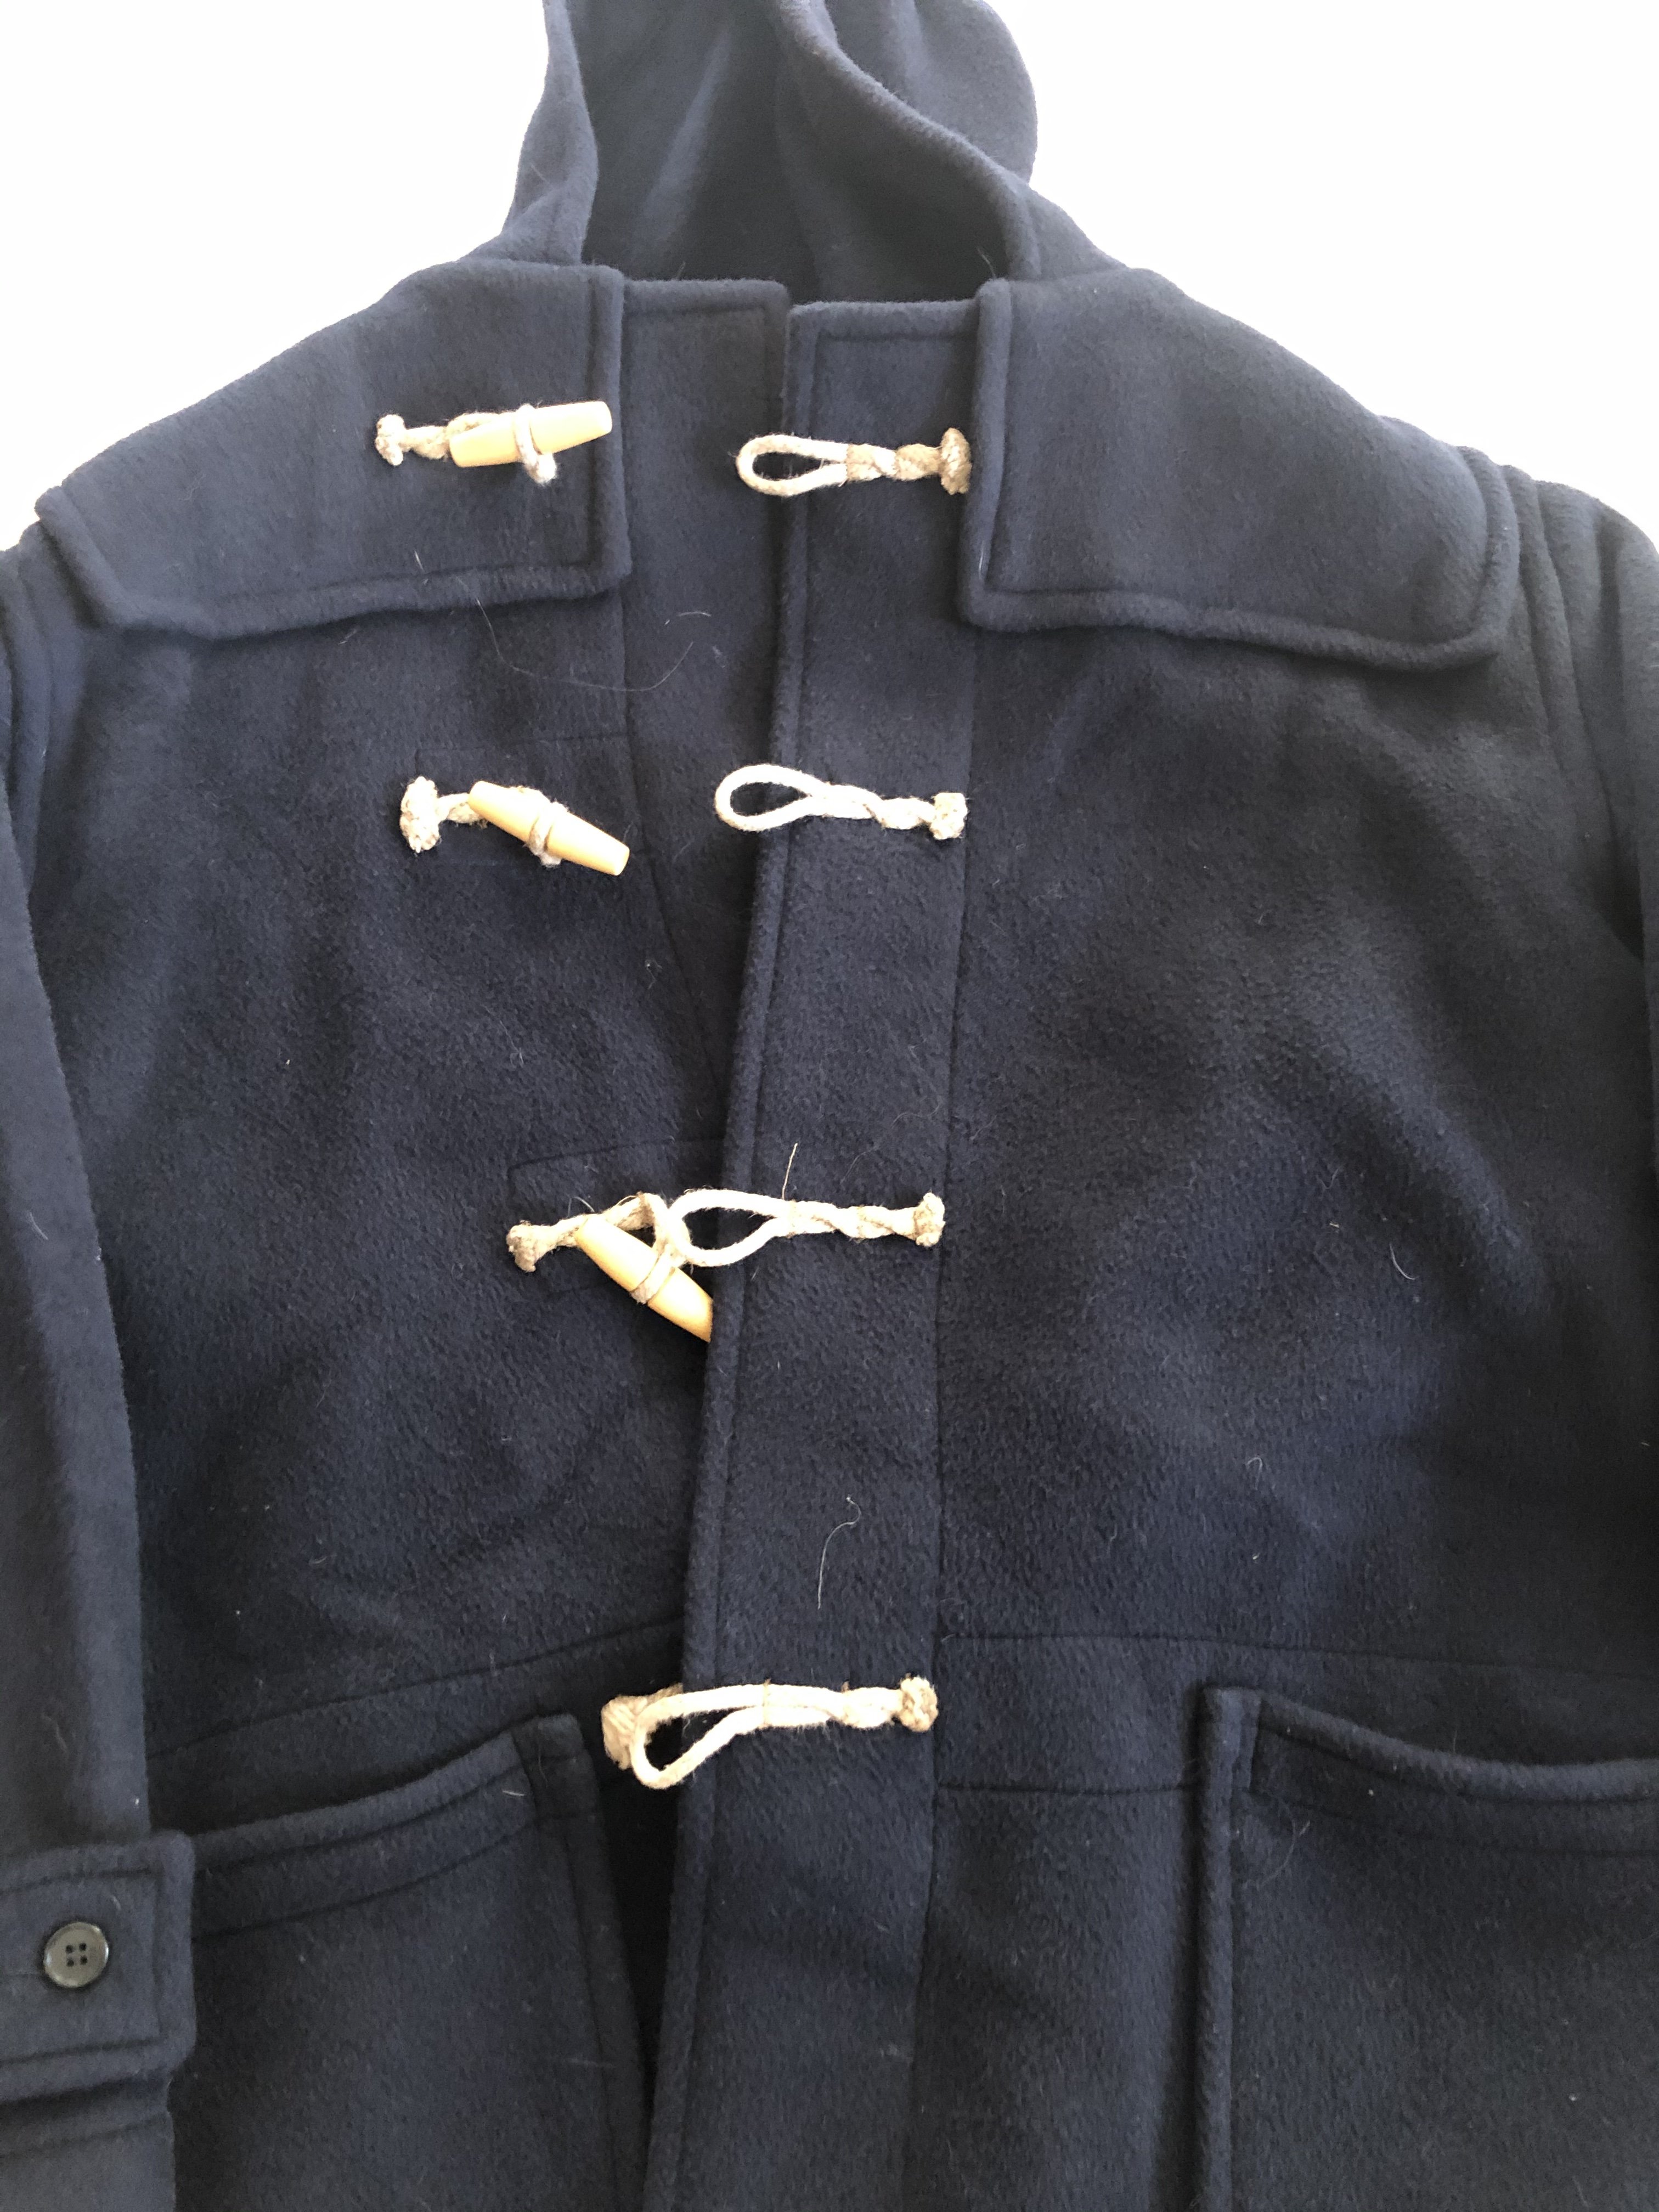 Need help identifying this one | Vintage Leather Jackets Forum